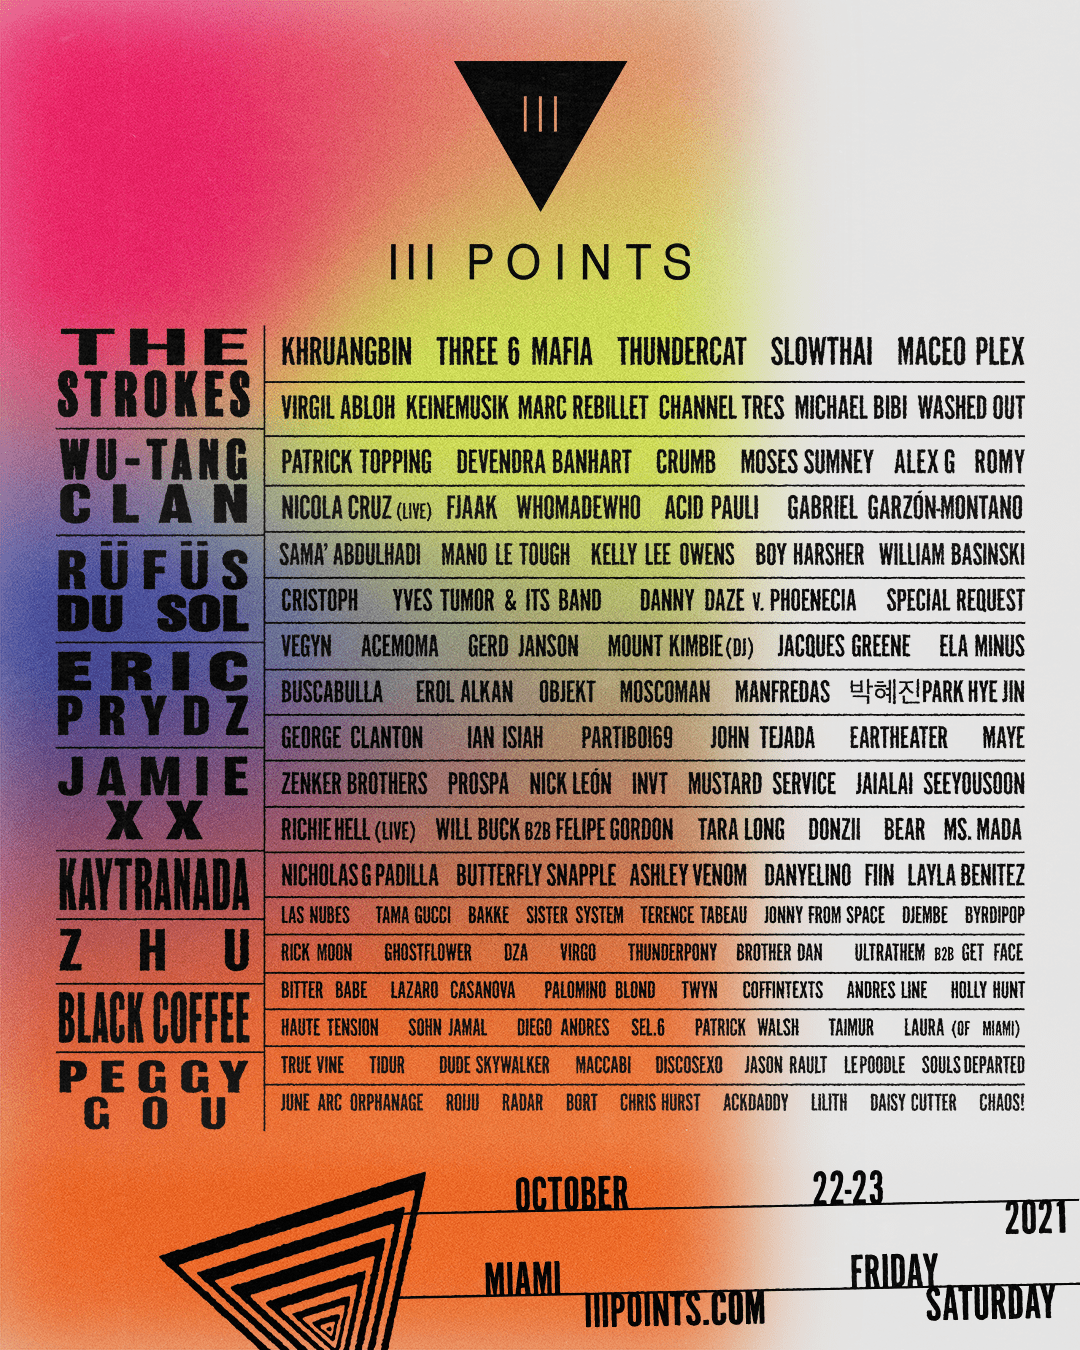 III Points 2021 lineup poster